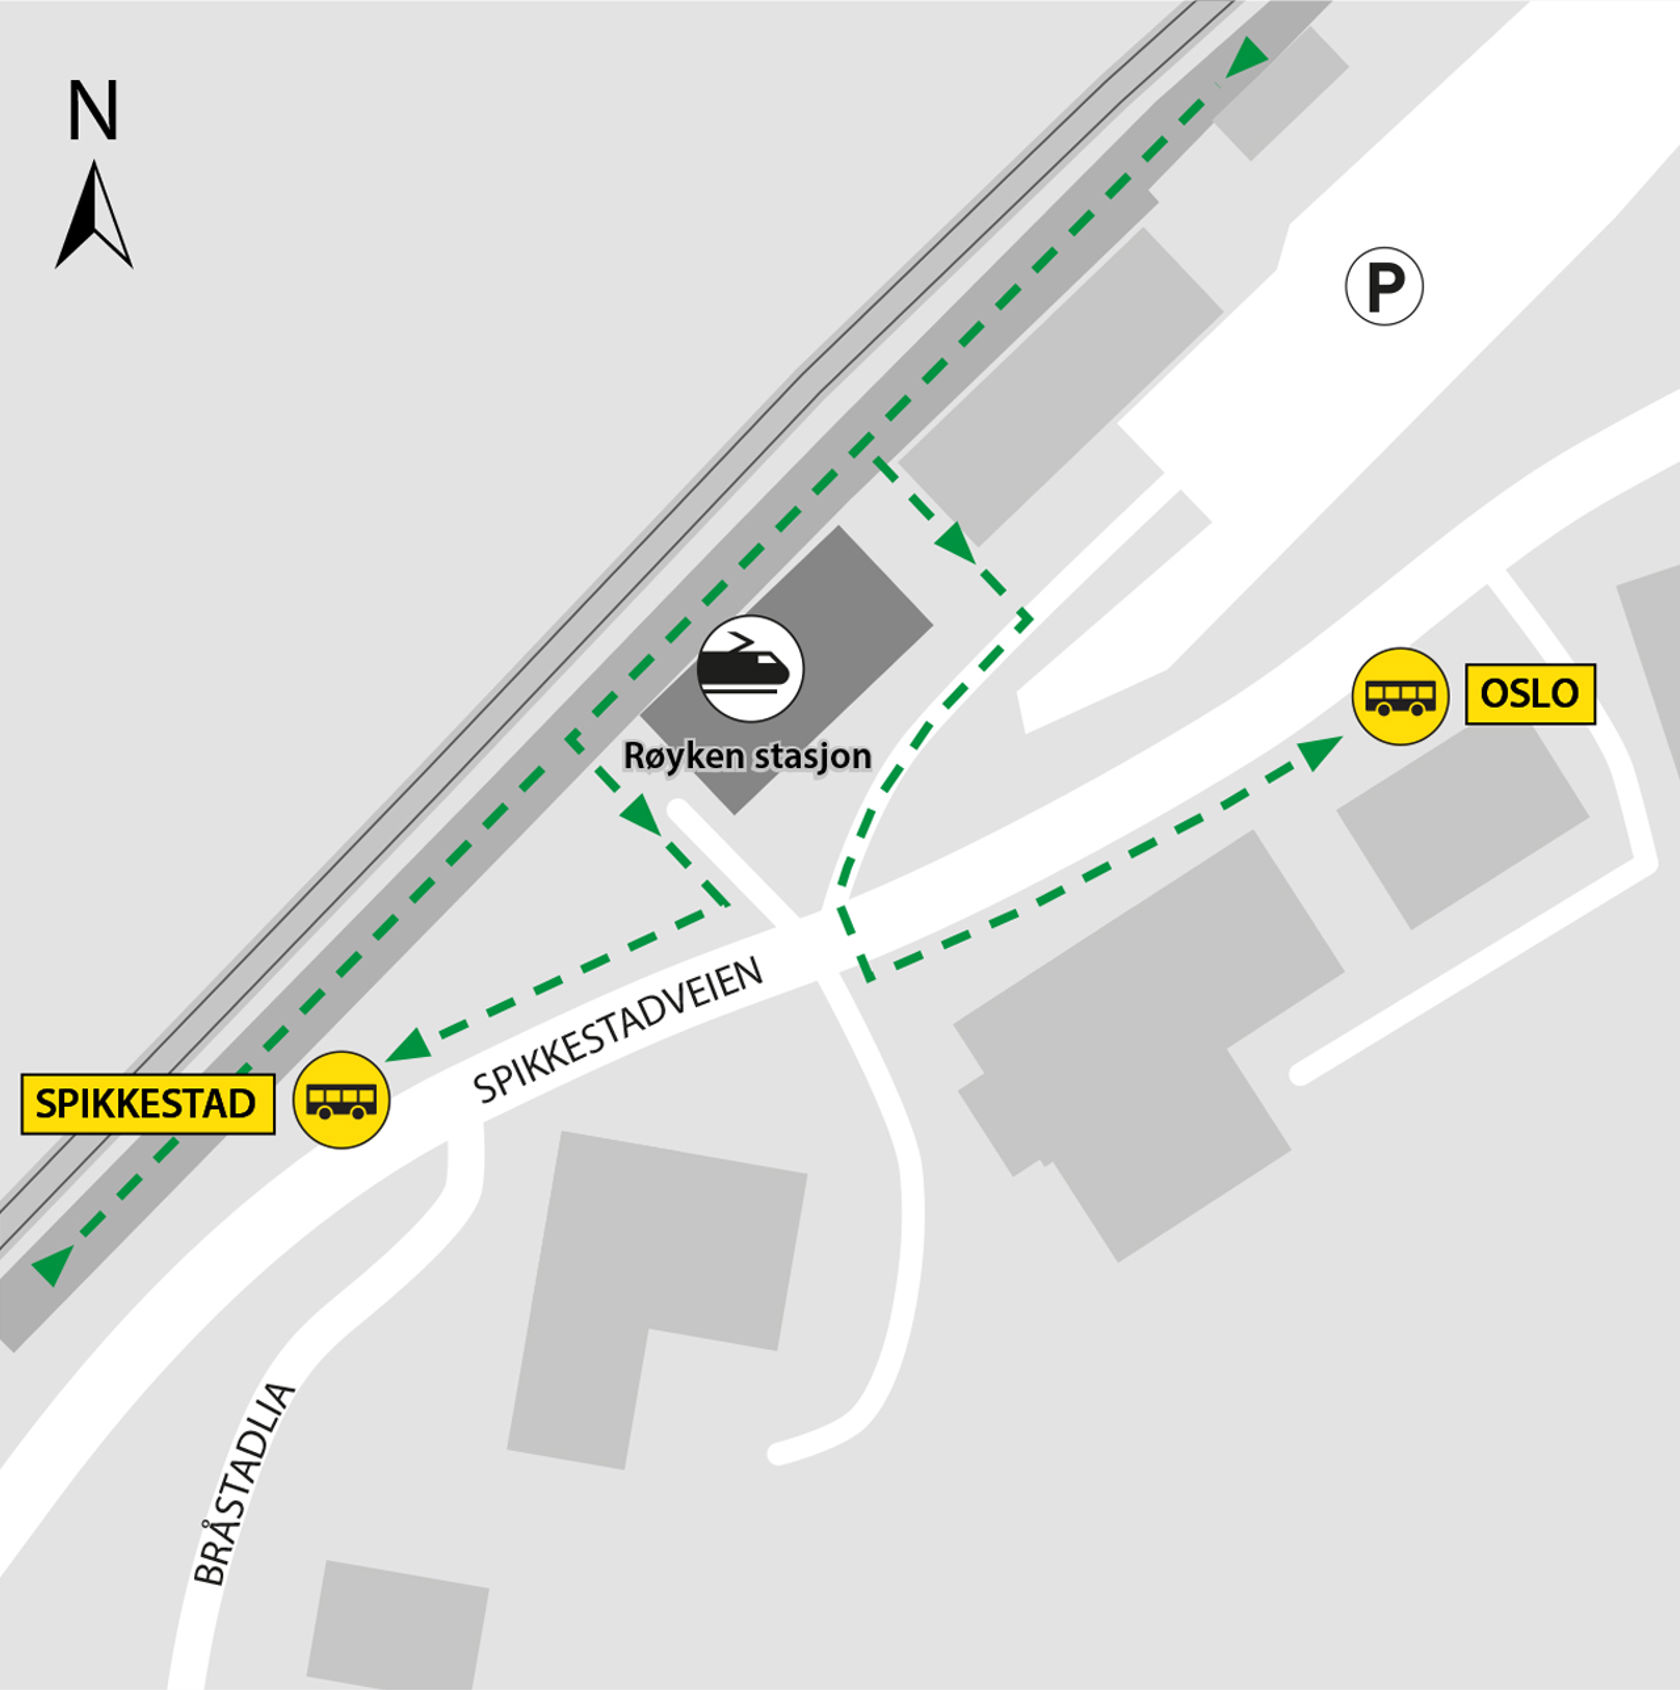 Map shows rail replacement service departs from bus stops Røyken station located in Spikkestadveien.